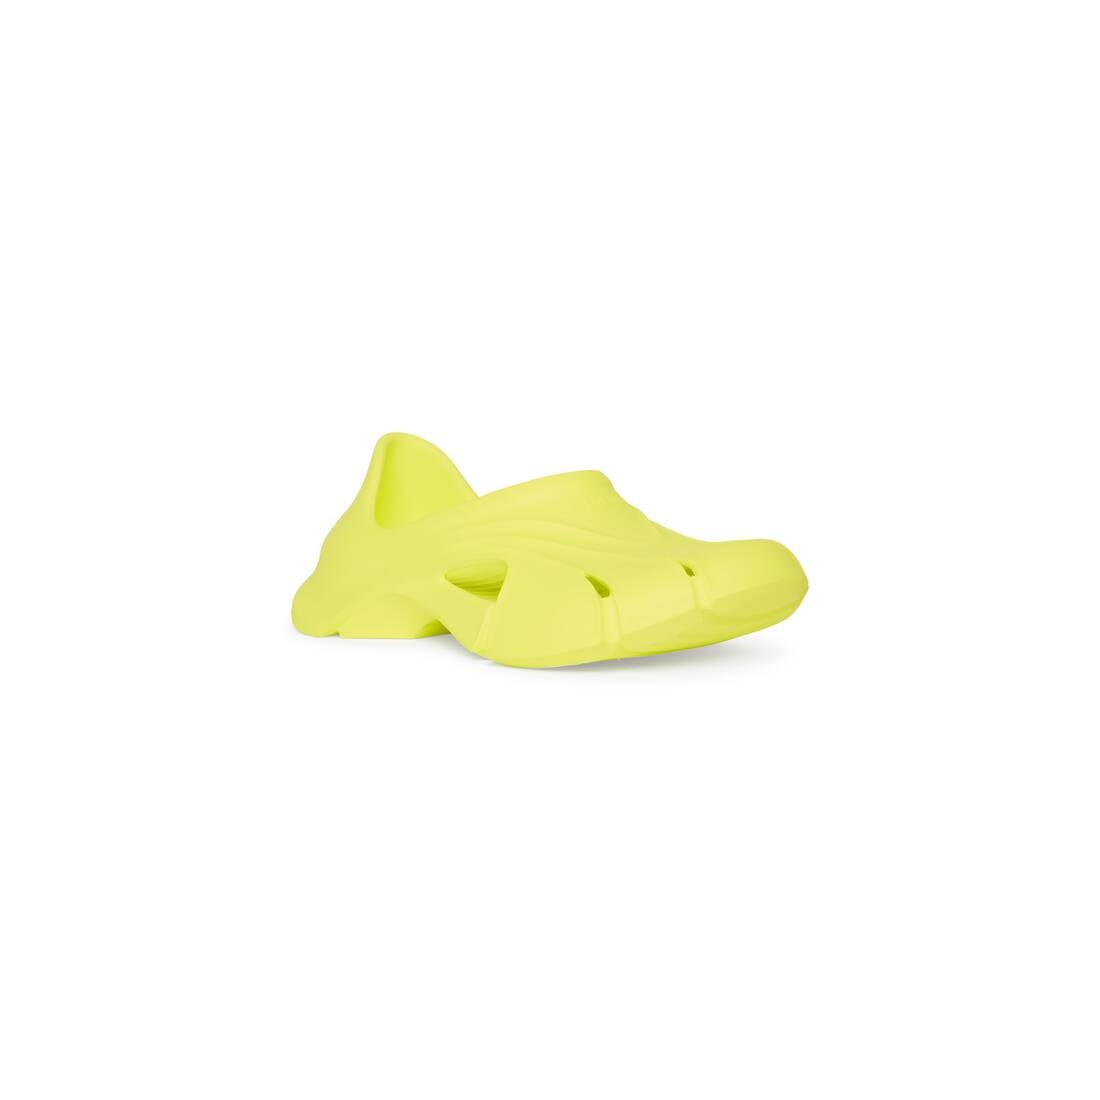 Men's Mold Closed in Yellow - 2